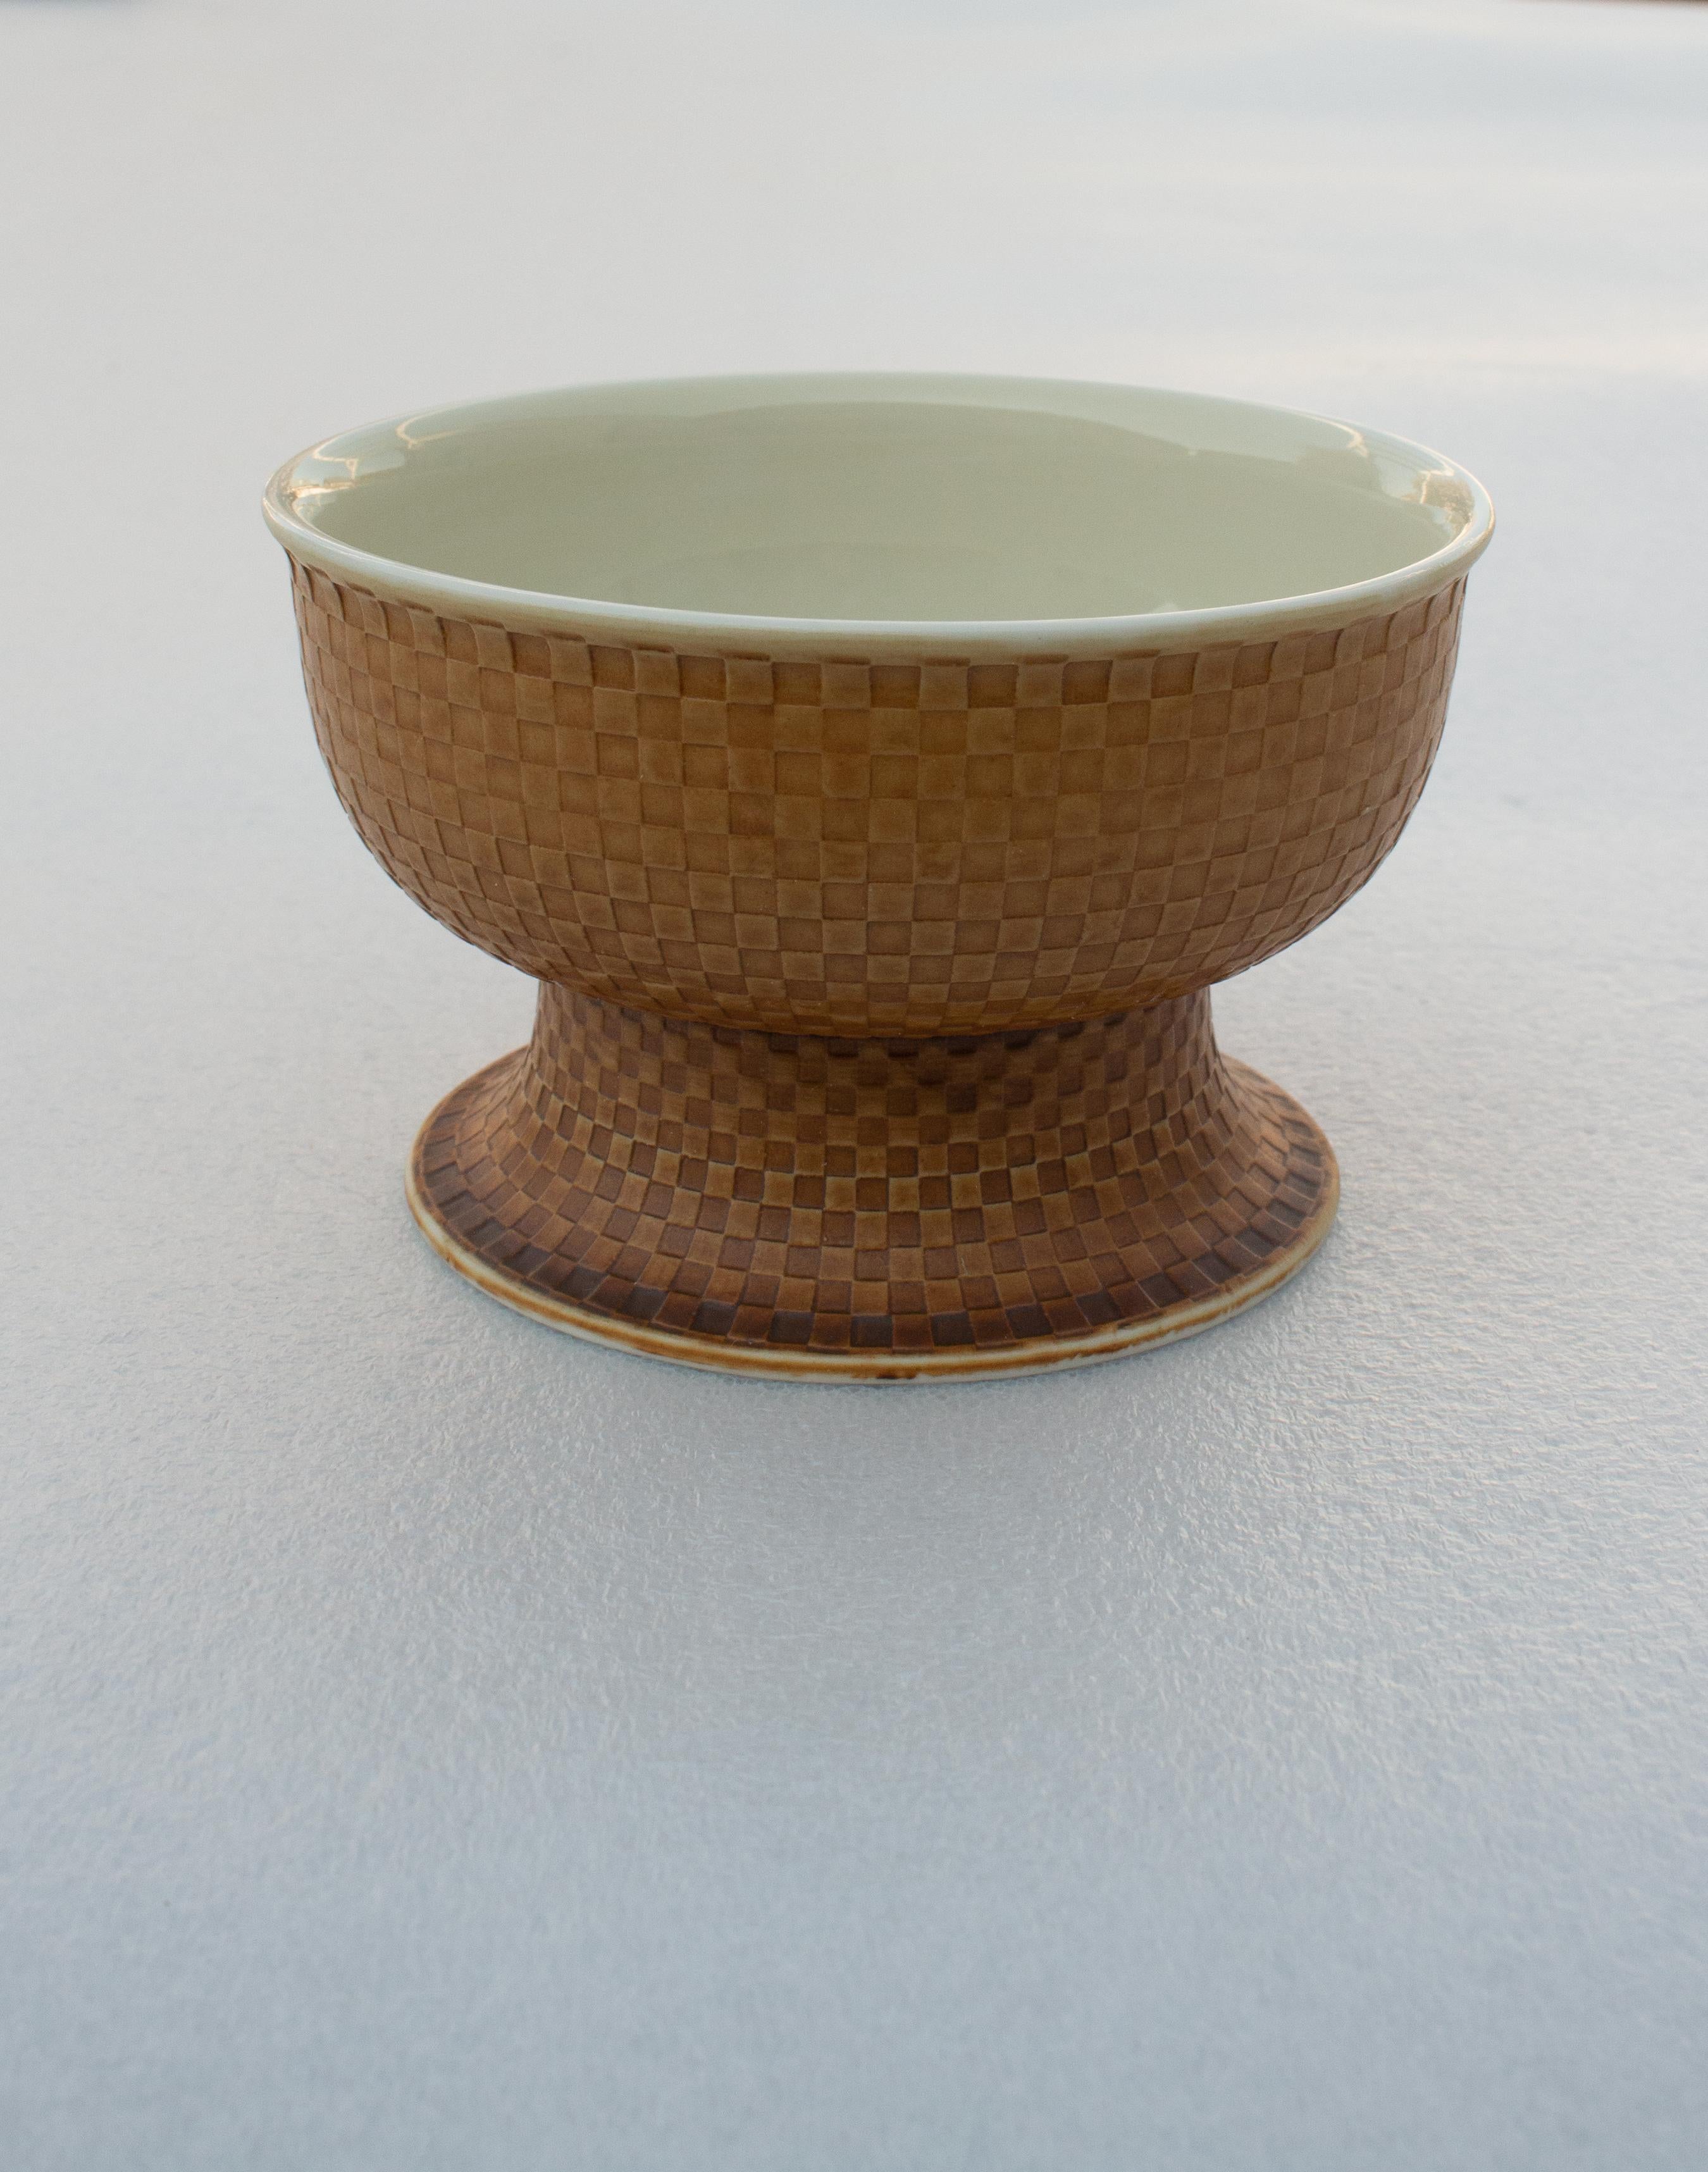 12 Bowls with terracotta glaze by Signe Persson Melin, (1925-2022) for Boda Nova, Sweden. She was a designer and craftsperson an was still working at the age of ninety. She has designed products in ceramics, metal, glass and concrete for companies